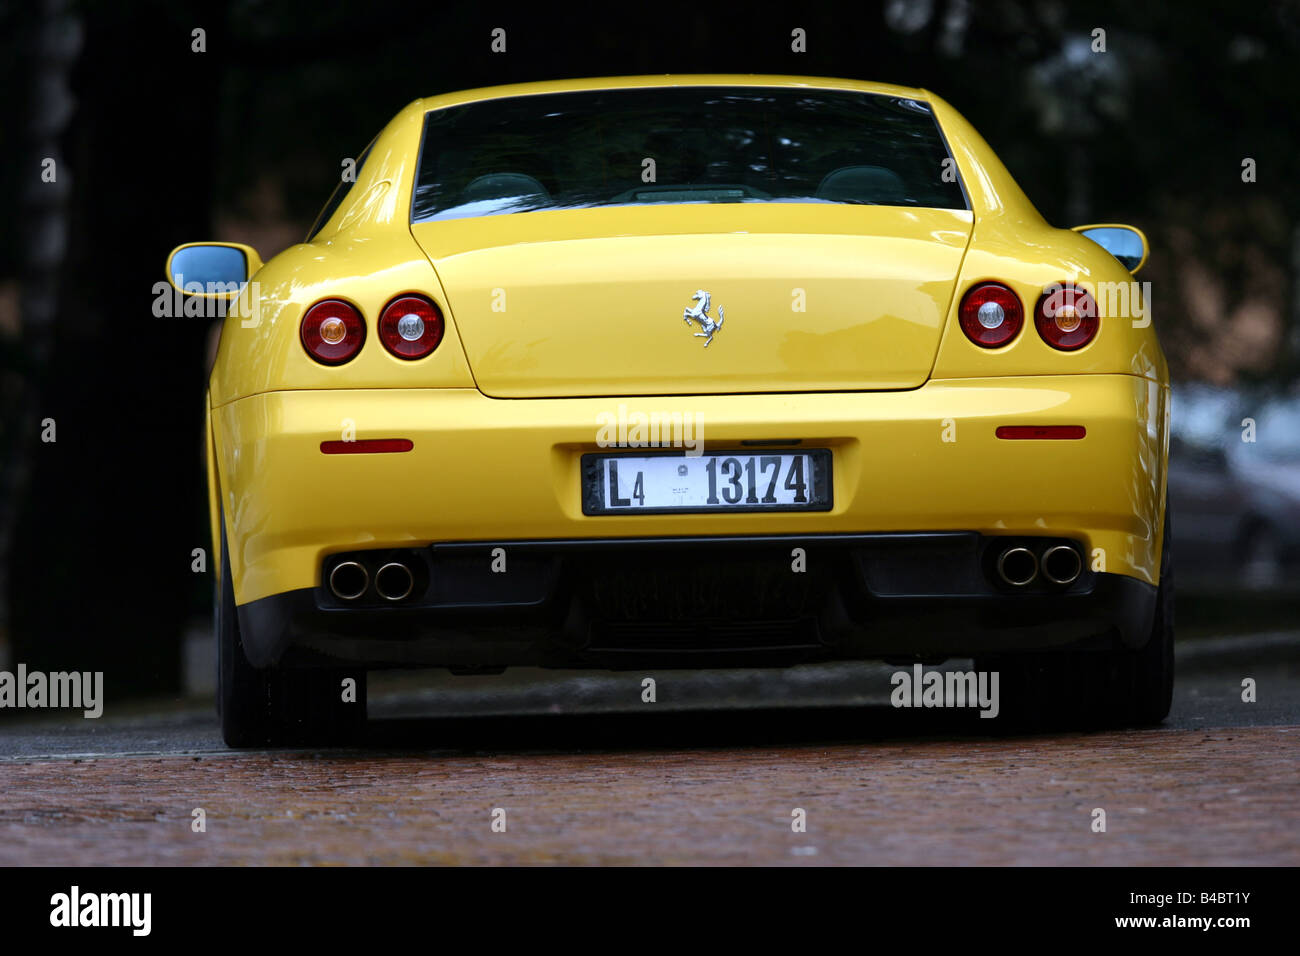 Car, Ferrari 612 Sapprox.lietti, roadster, model year 2004-, coupe/Coupe, yellow, standing, upholding, rear view, photographer: Stock Photo